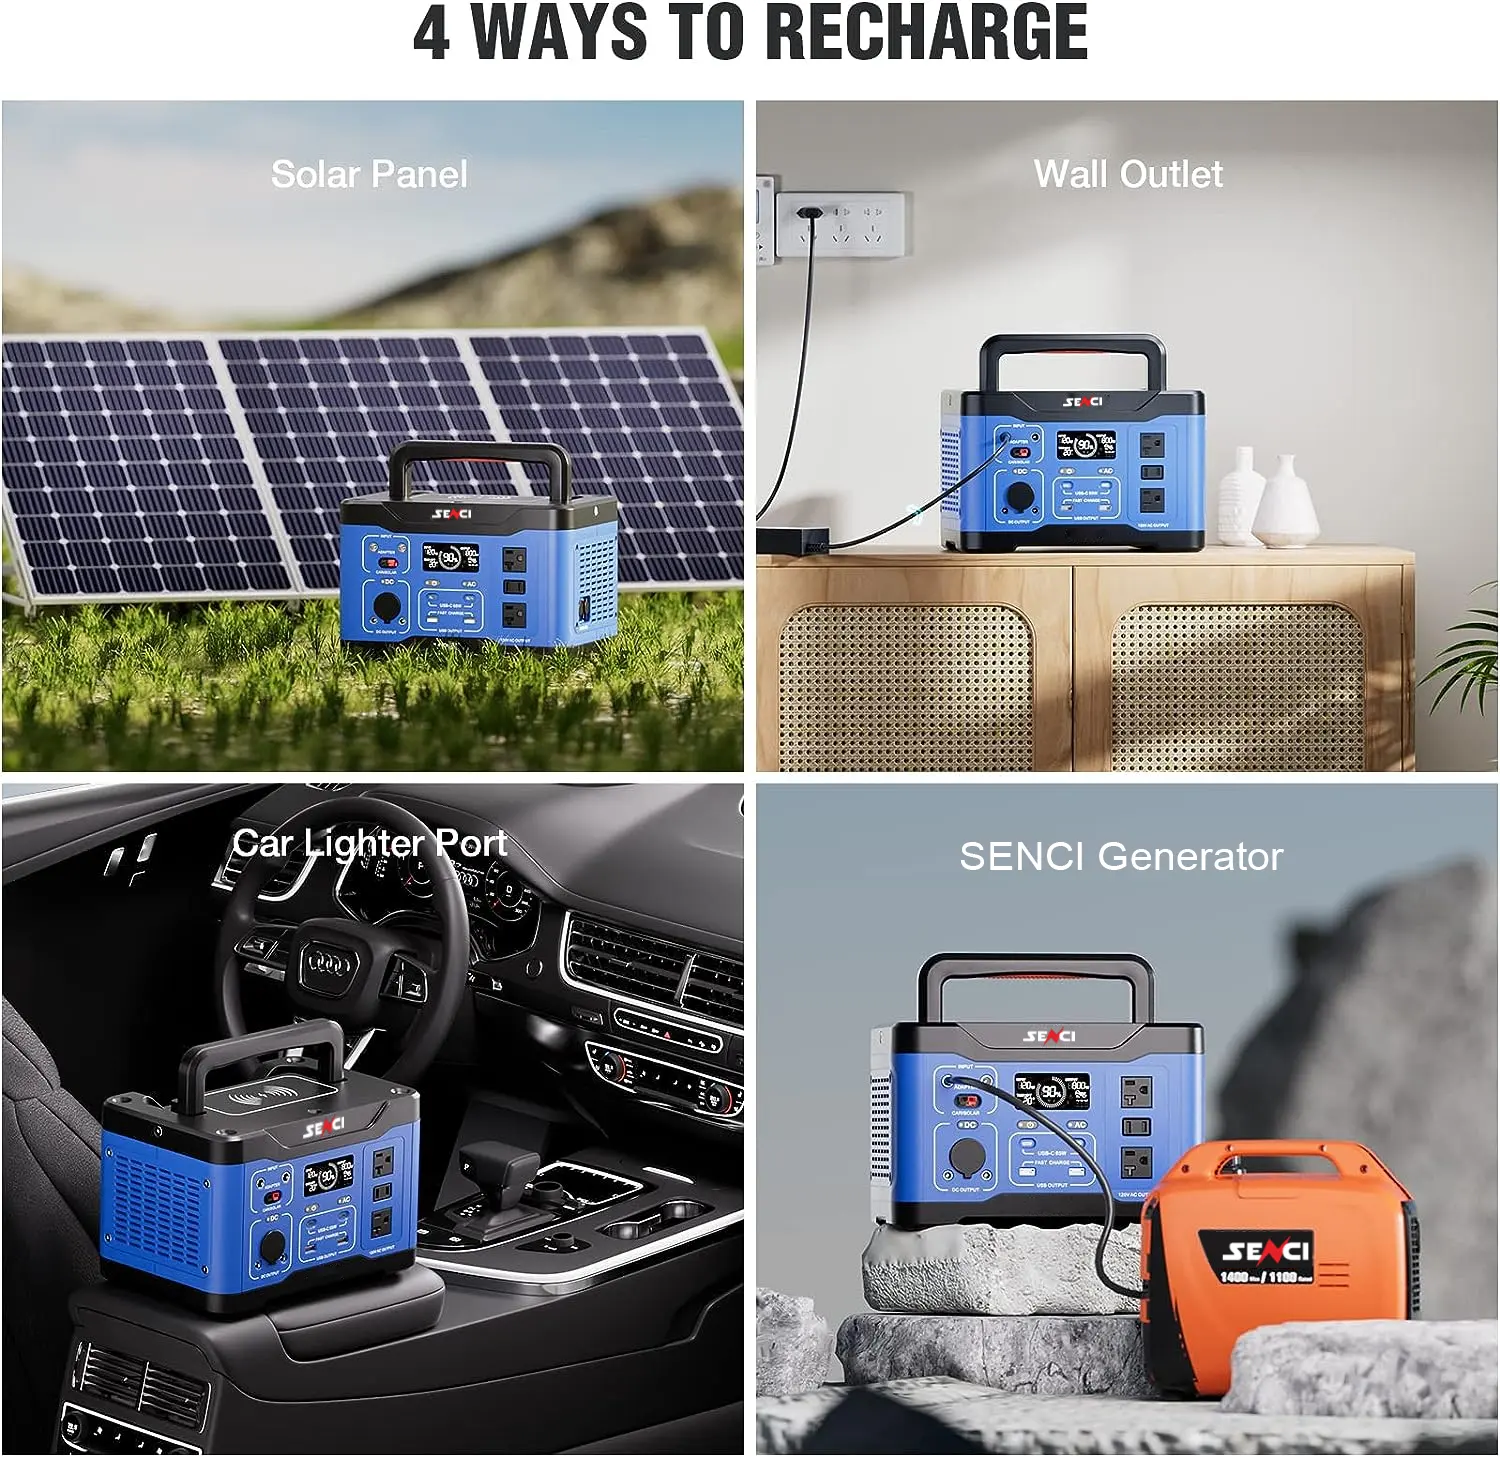 Portable Power Station 600W 509Wh 3 hours Fast Charge power generator USB output energy storage battery for RV camping